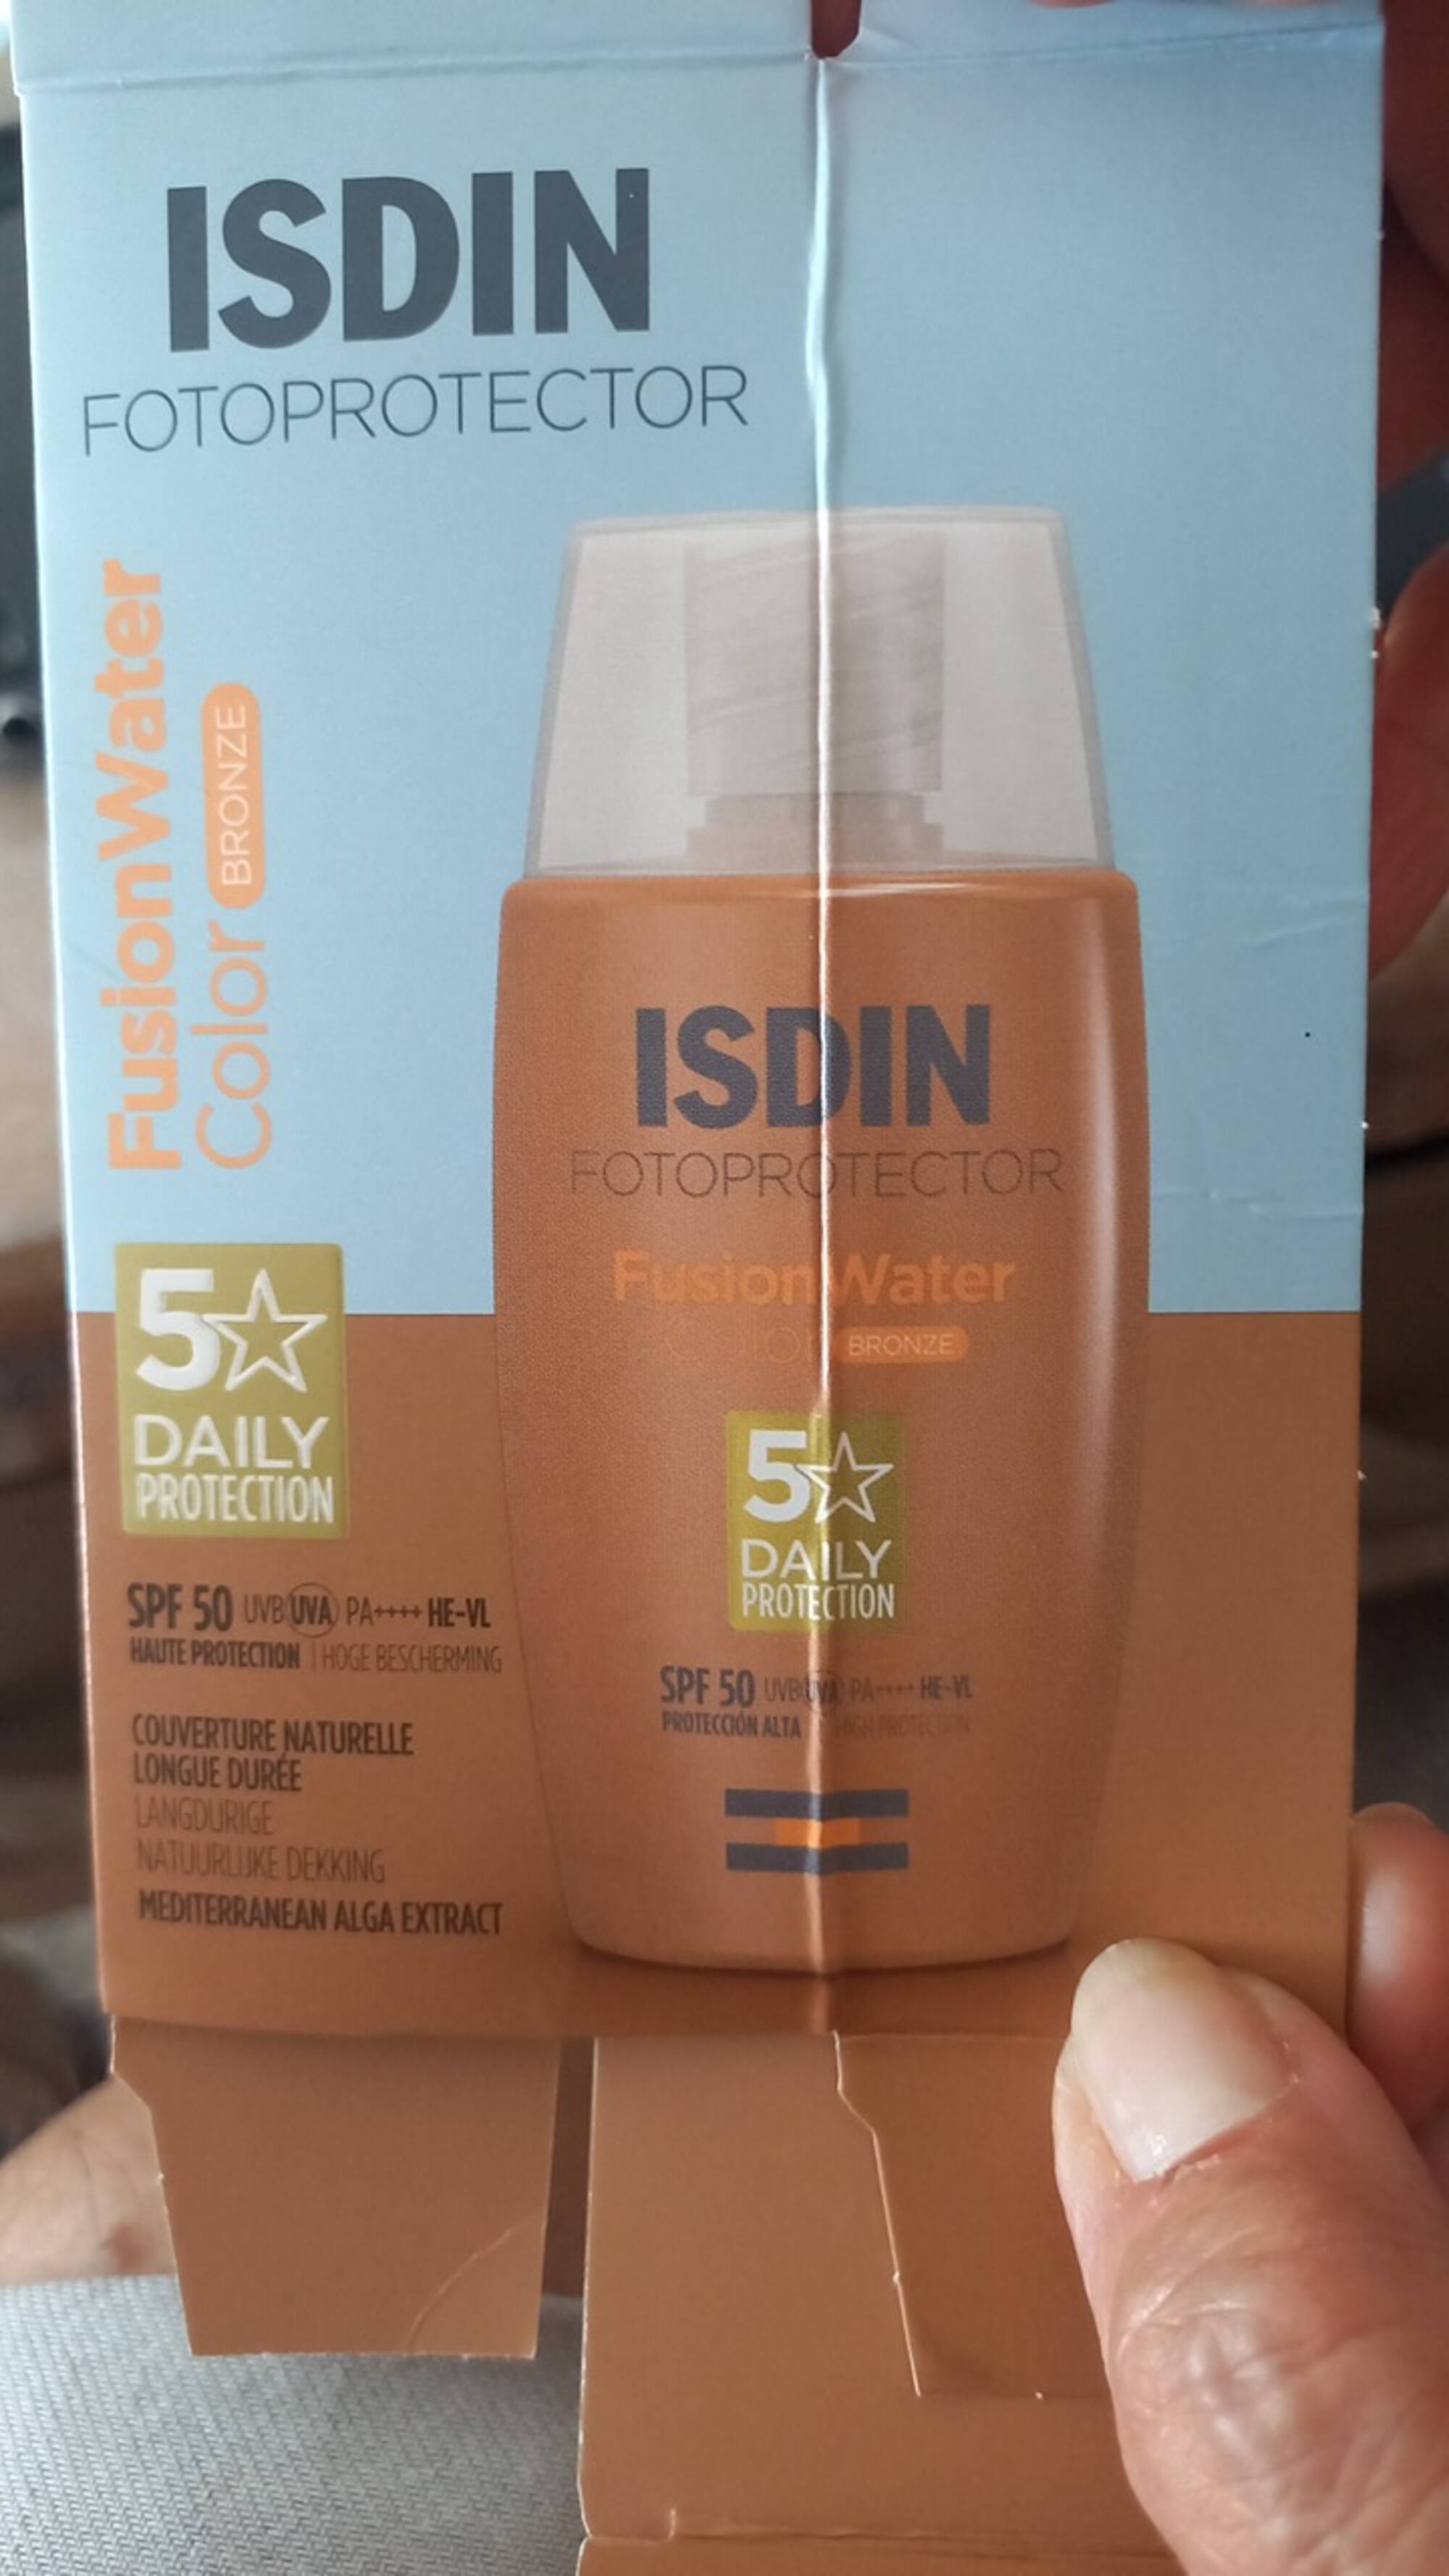 ISDIN - Fotoprotector fusion water - Couverture naturelle longue durée SPF 50